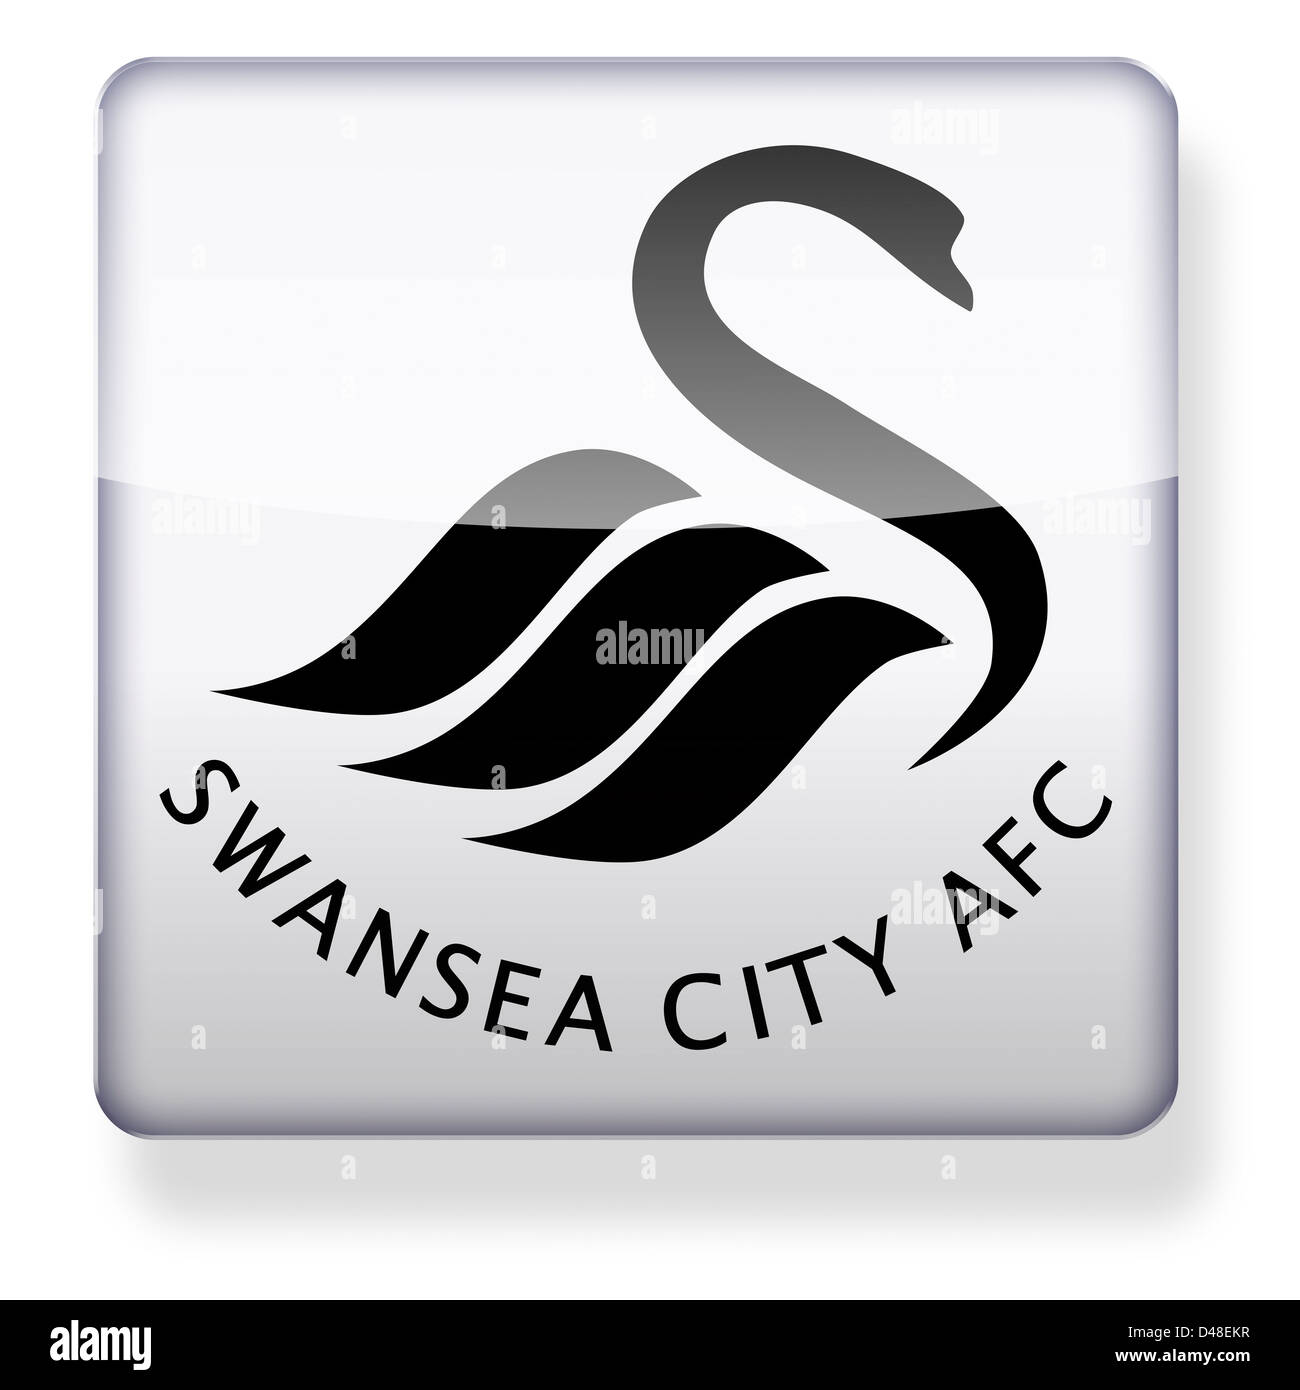 Swansea City football club logo as an app icon. Clipping path included. Stock Photo